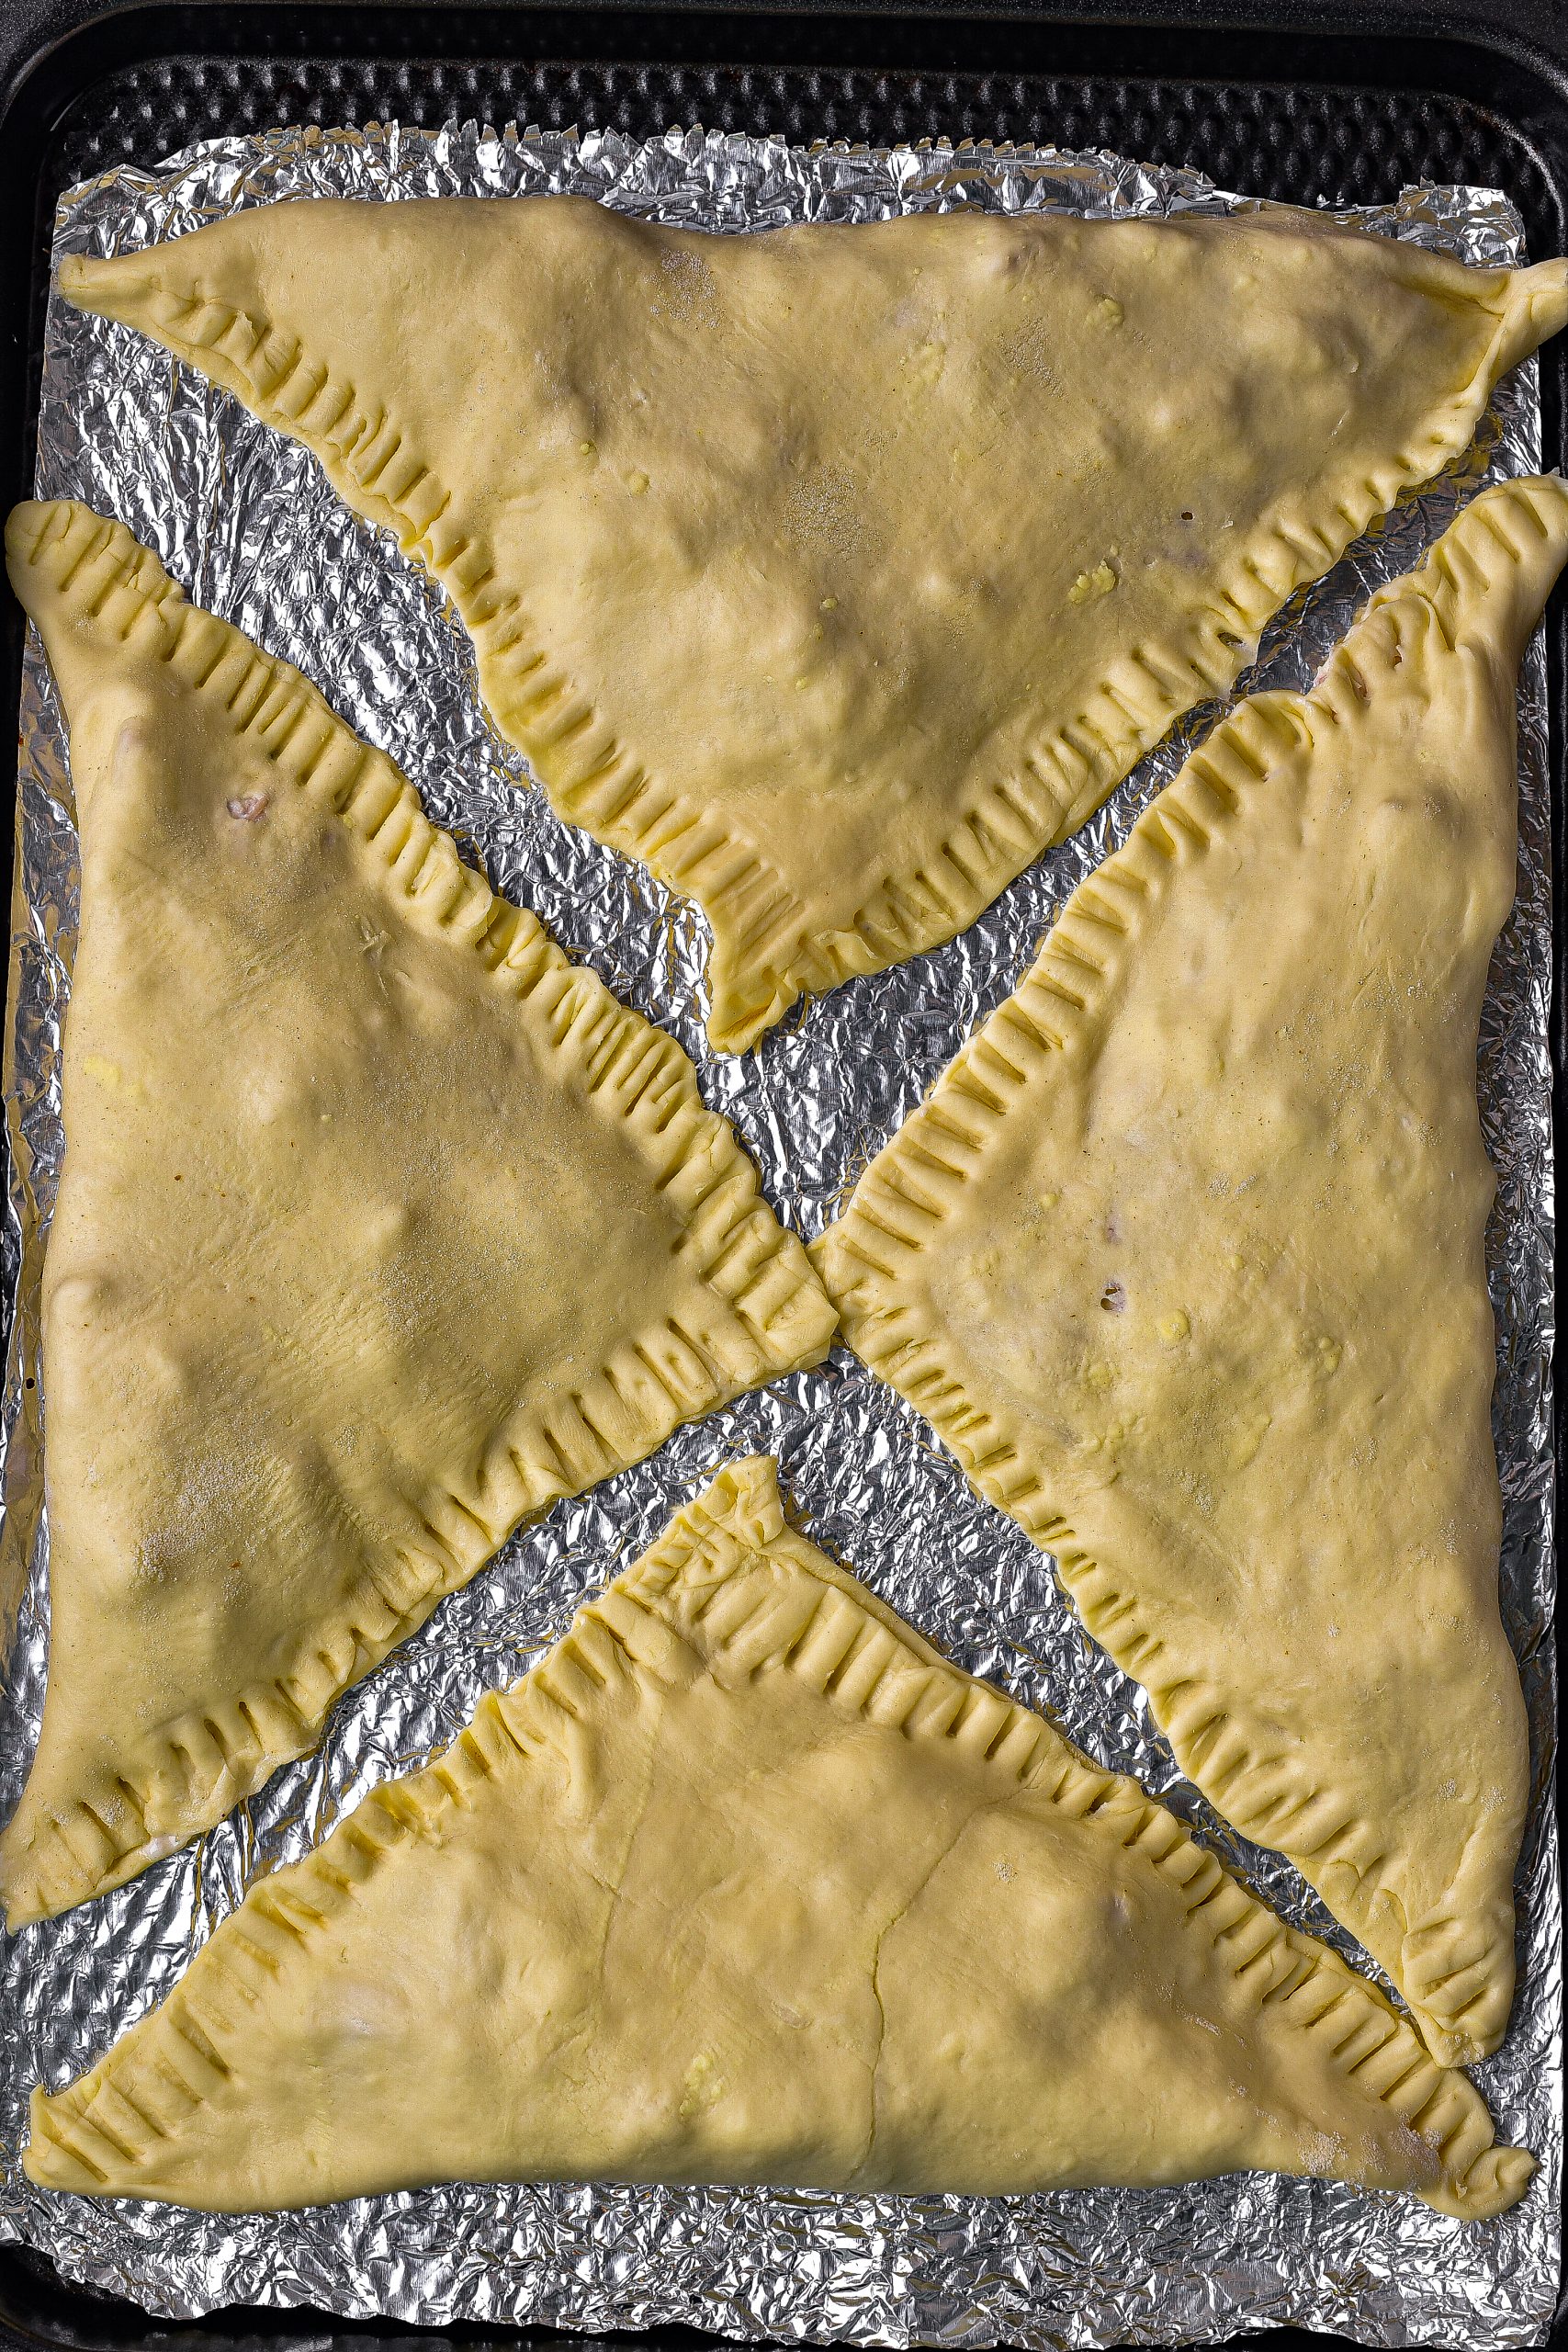 Brush the edges of each puff pastry square with some water, and fold one corner of each square over to the other to form triangles. 